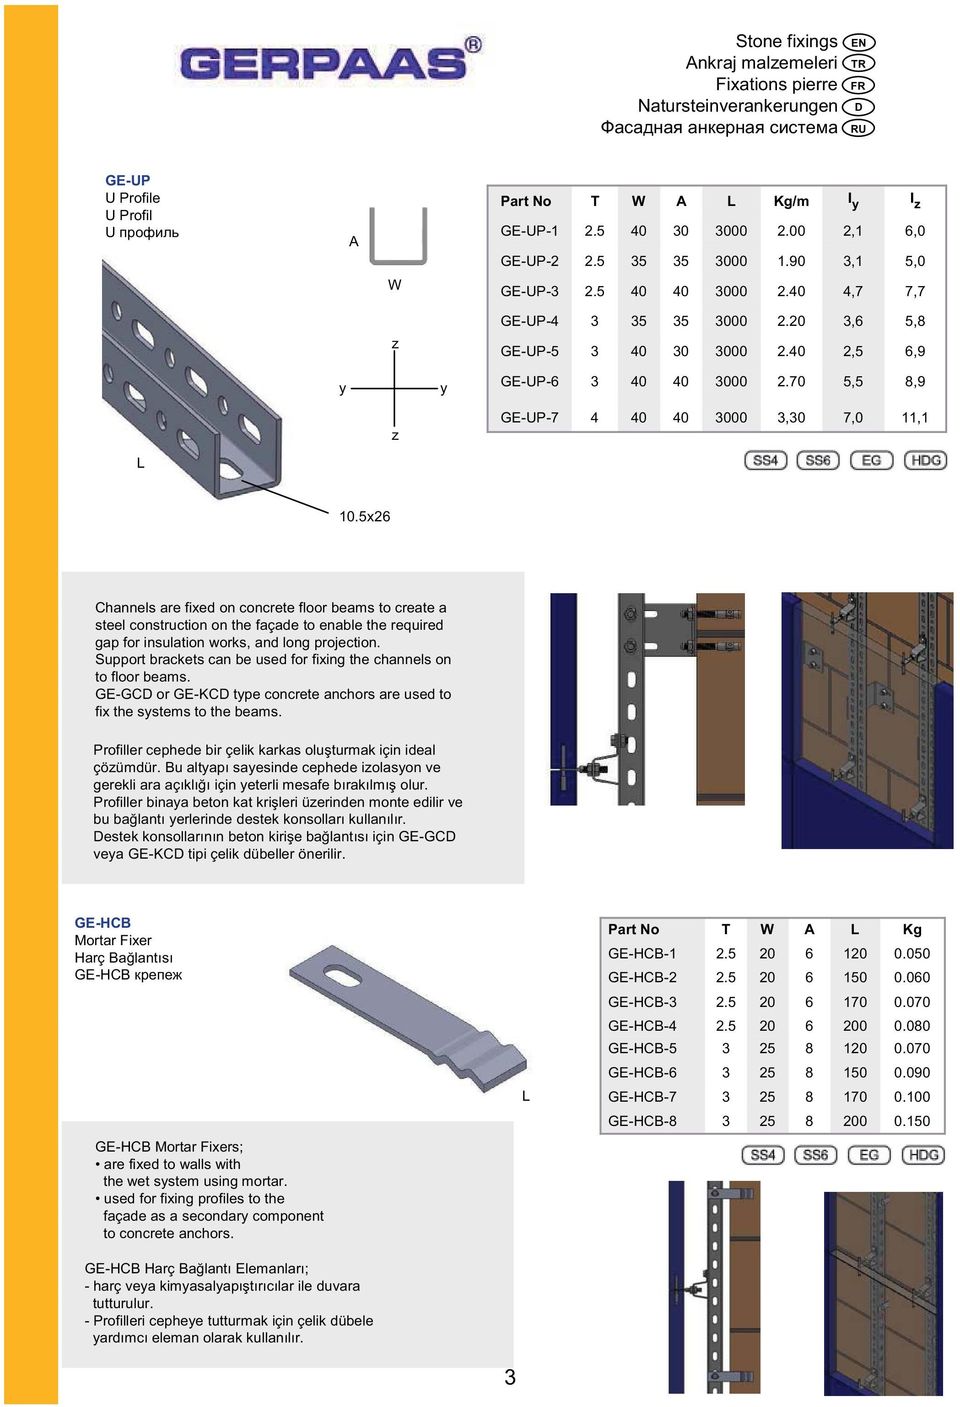 Support brackets can be used for fixing the channels on to floor beams. GE-GC or GE-KC type concrete anchors are used to fix the systems to the beams.